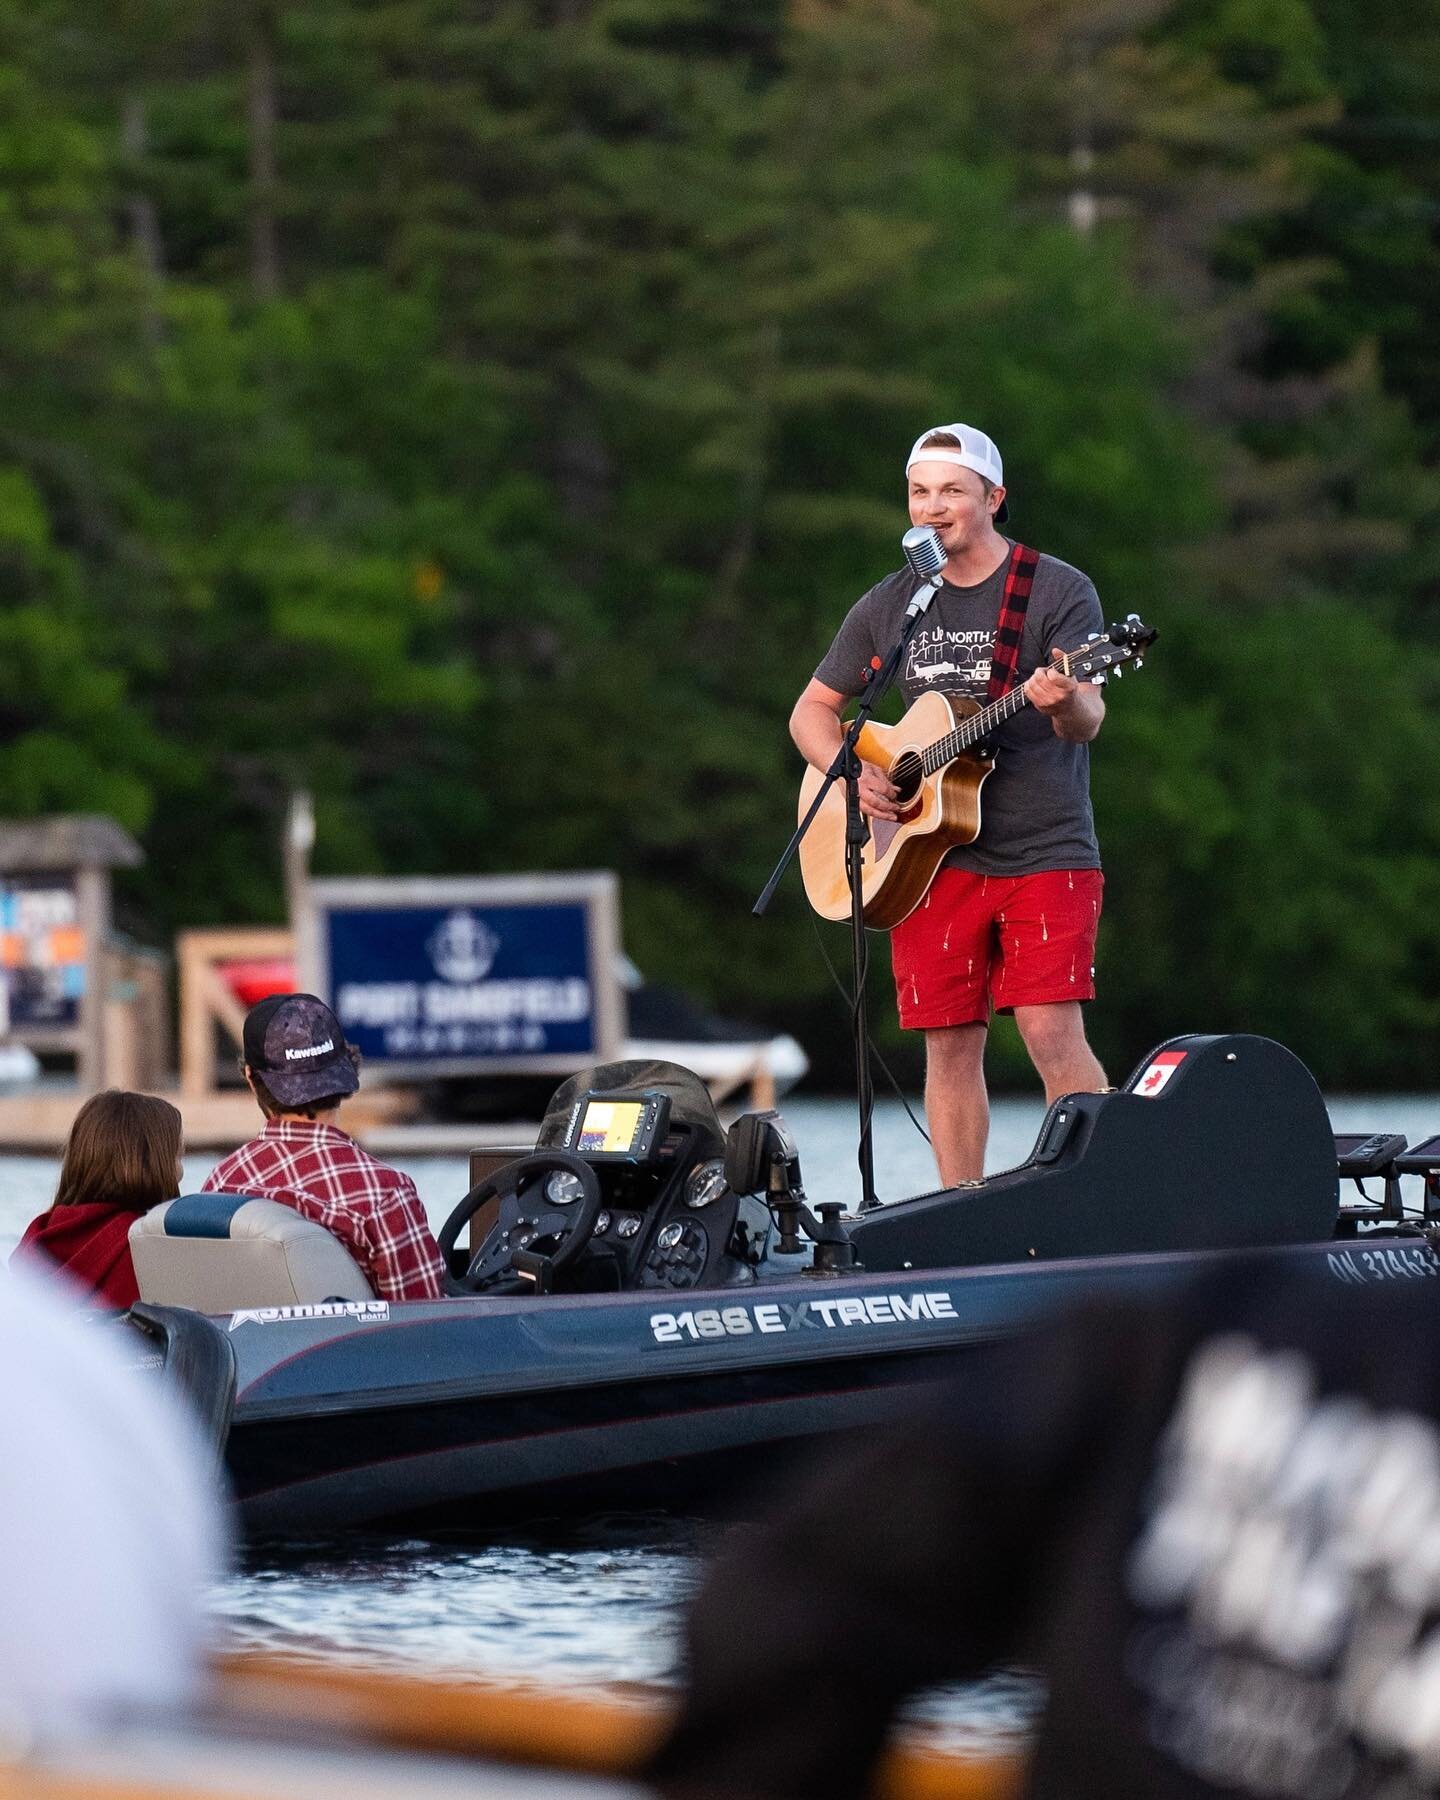 Country concerts on the lake! Well known around the Muskoka Lakes, @johnnykennedymusic brings the true cottage country style to his music, stay tuned for a new song release this June (and a new music video we created!) 

Looking forward to more night